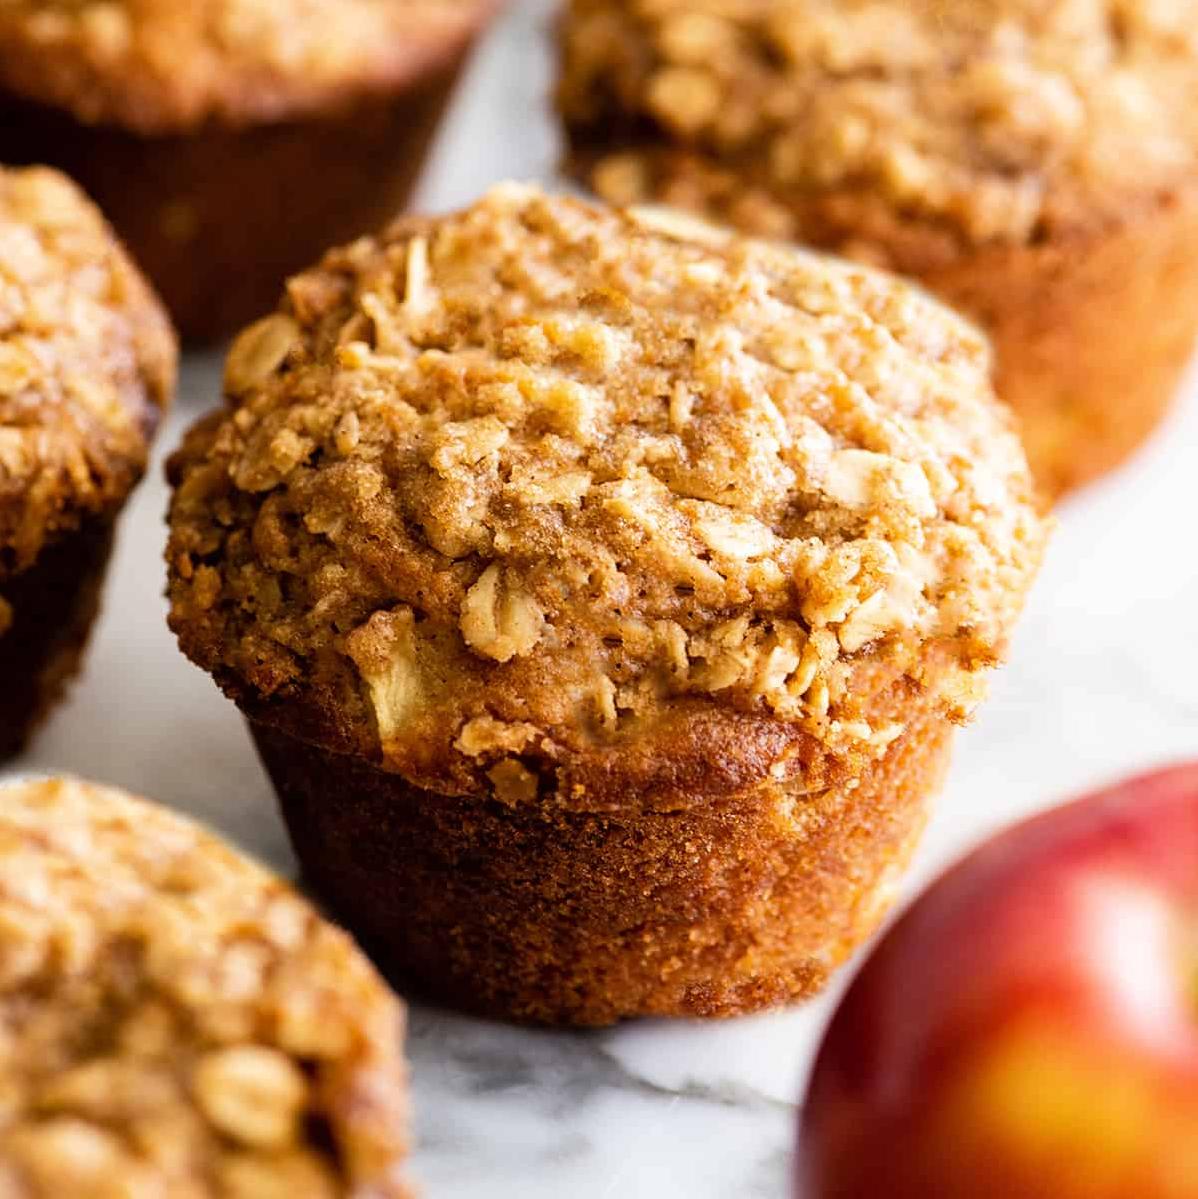  You won't believe how easy it is to make these muffins, a perfect breakfast treat.